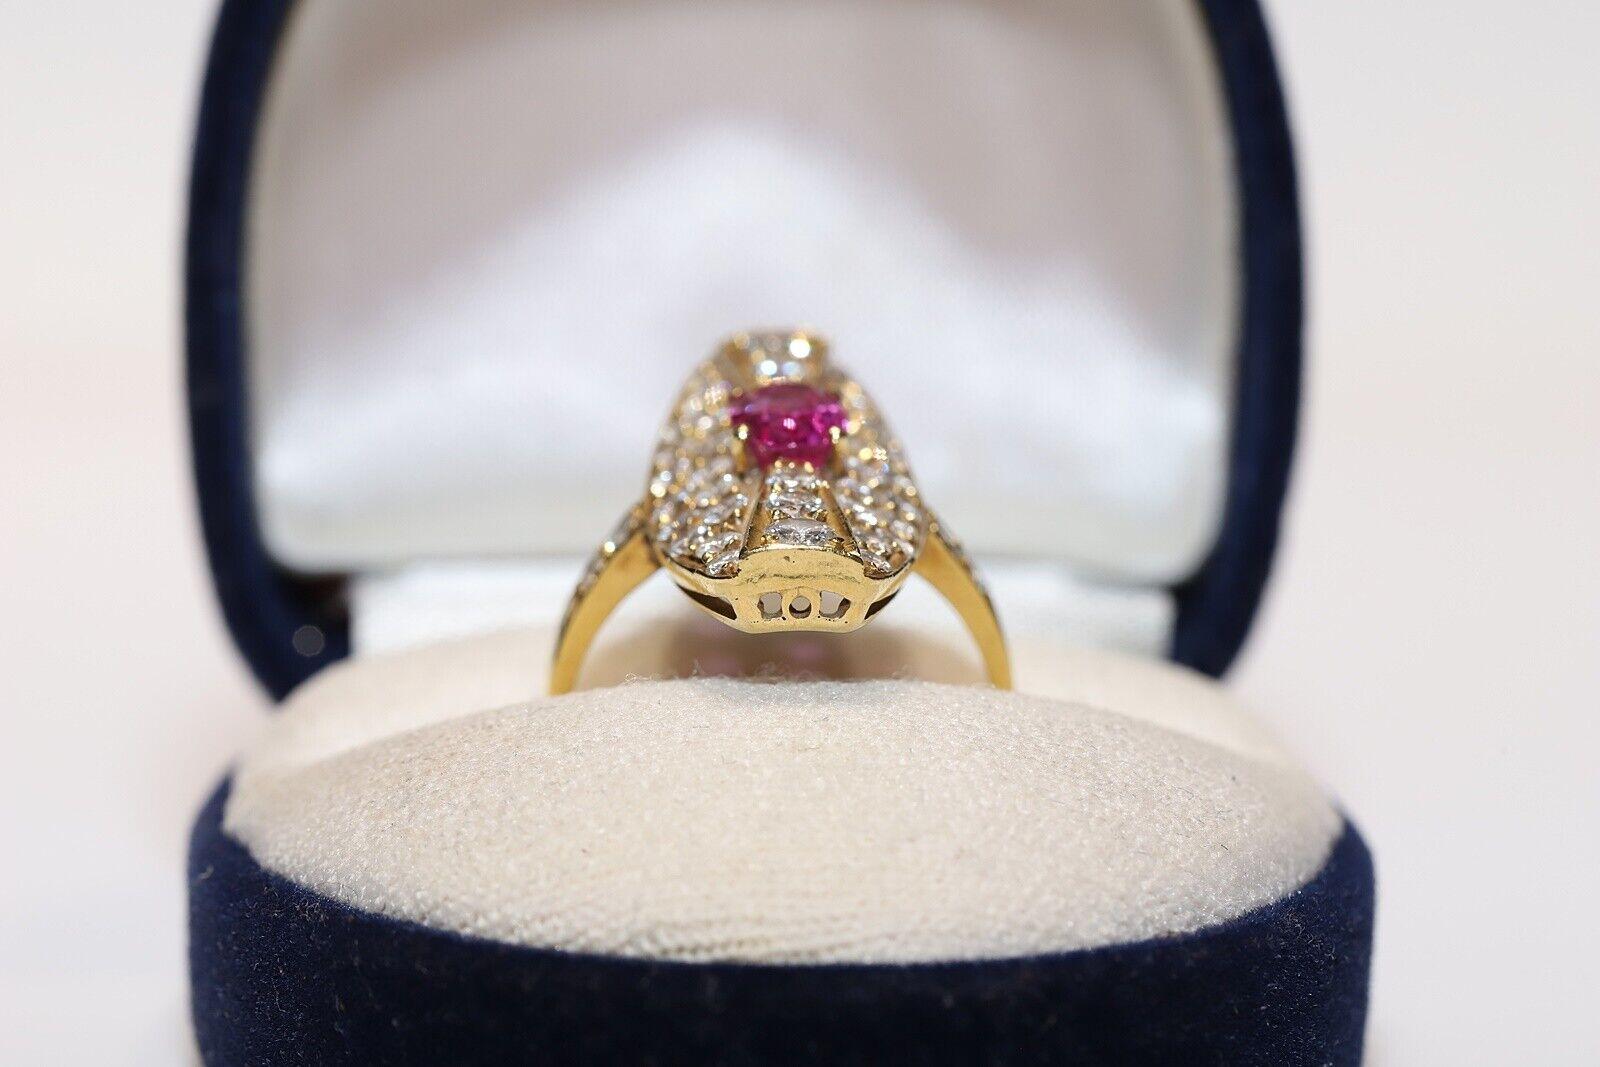 In very good condition.
Total weight is 5.2 grams.
Totally is brilliant about 0.60 carat.
Totally is ruby 1.20 carat.
Ring size is US 6.25 .
Box is not included.
Please contact for any questions.